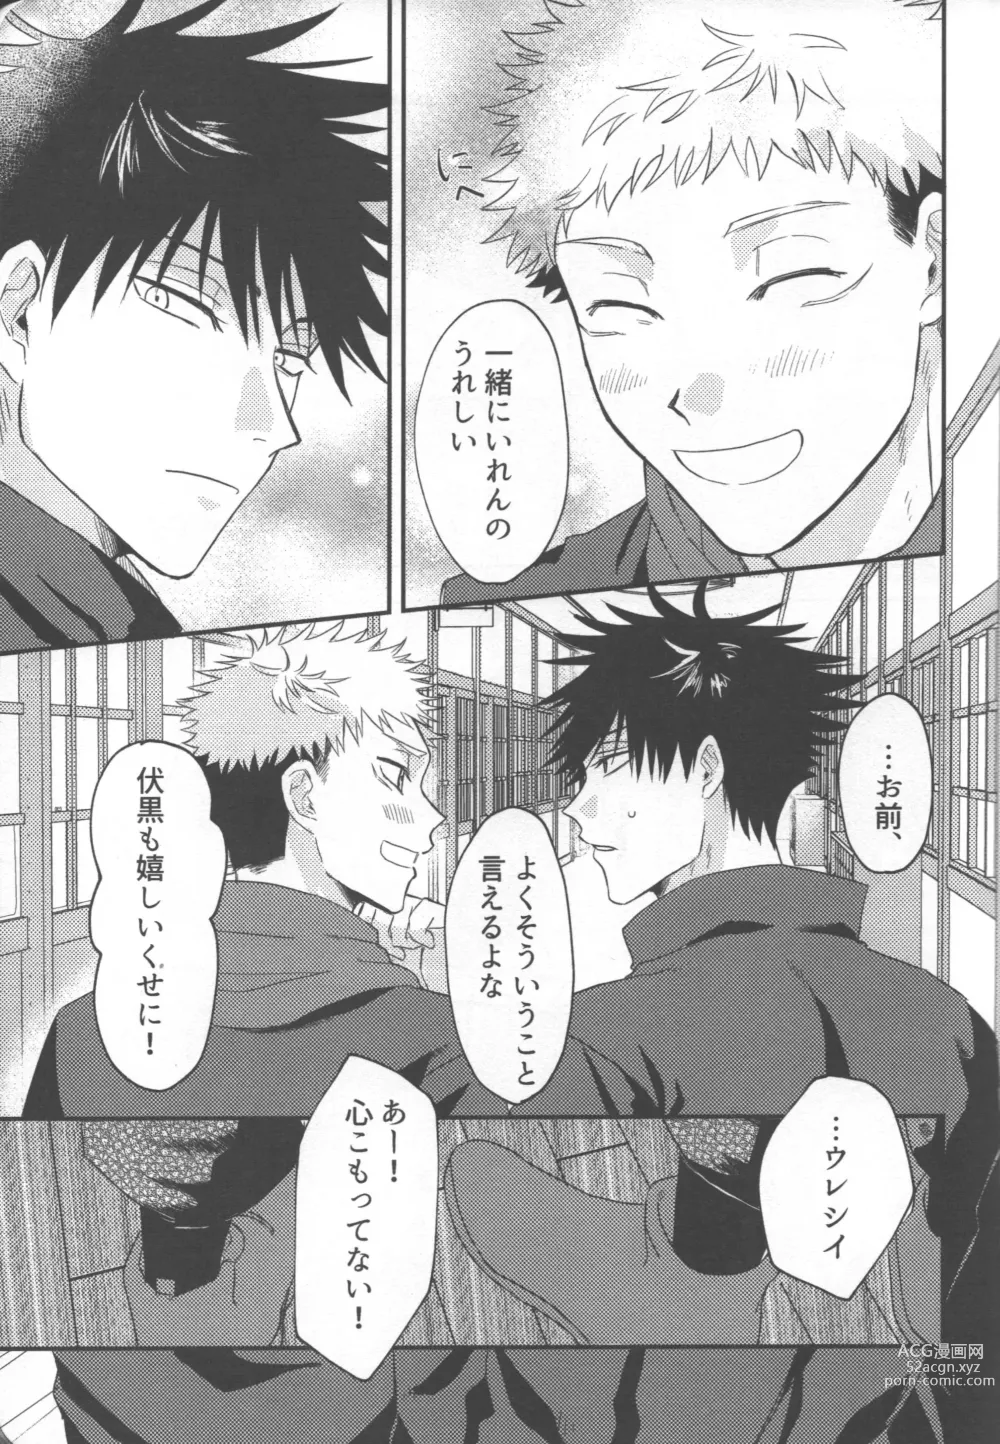 Page 8 of doujinshi Dont Look at ME Like That.